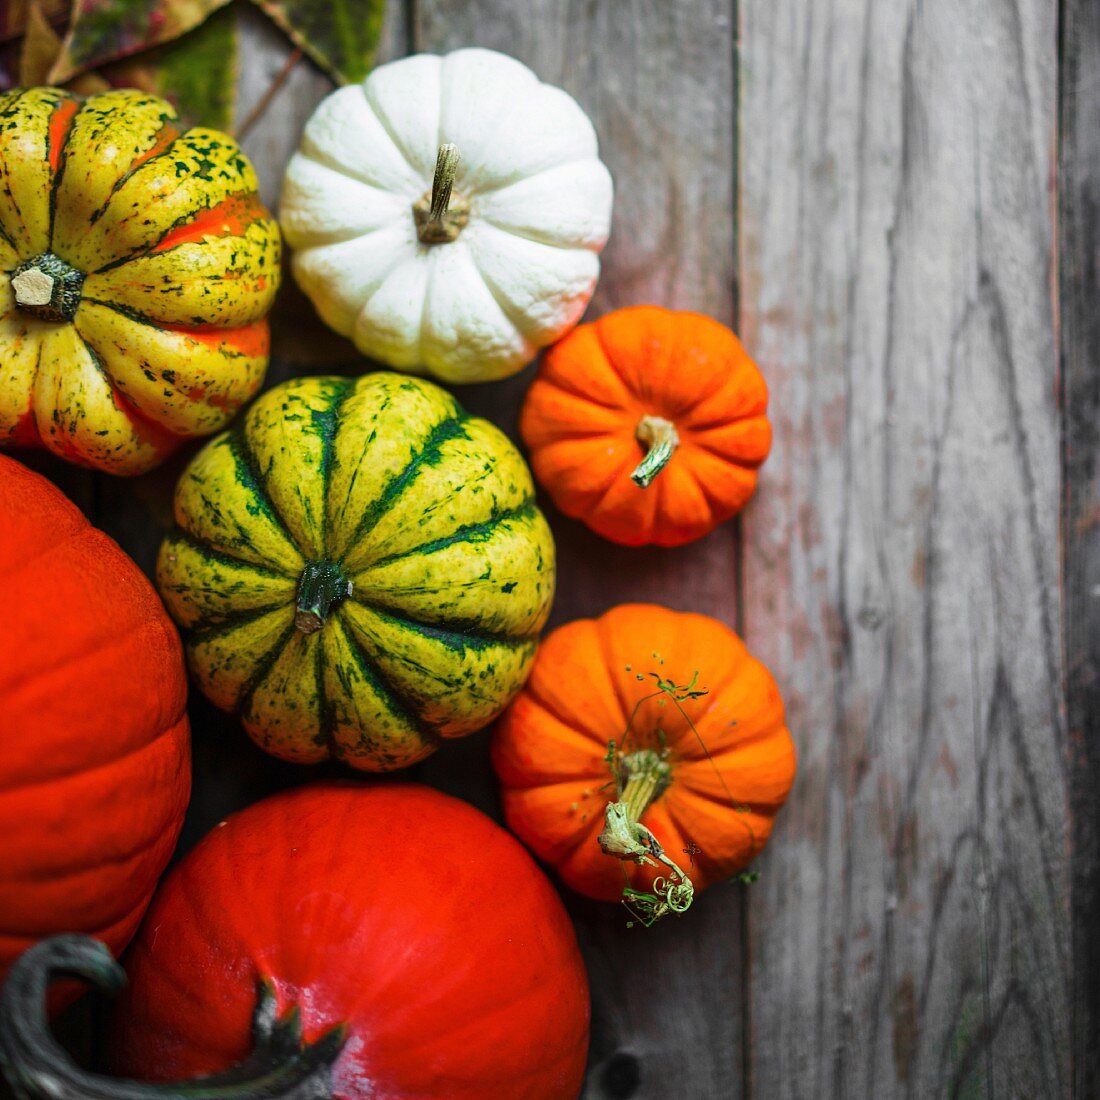 Bright pumpkins and autumn leaves on rustic wooden surface